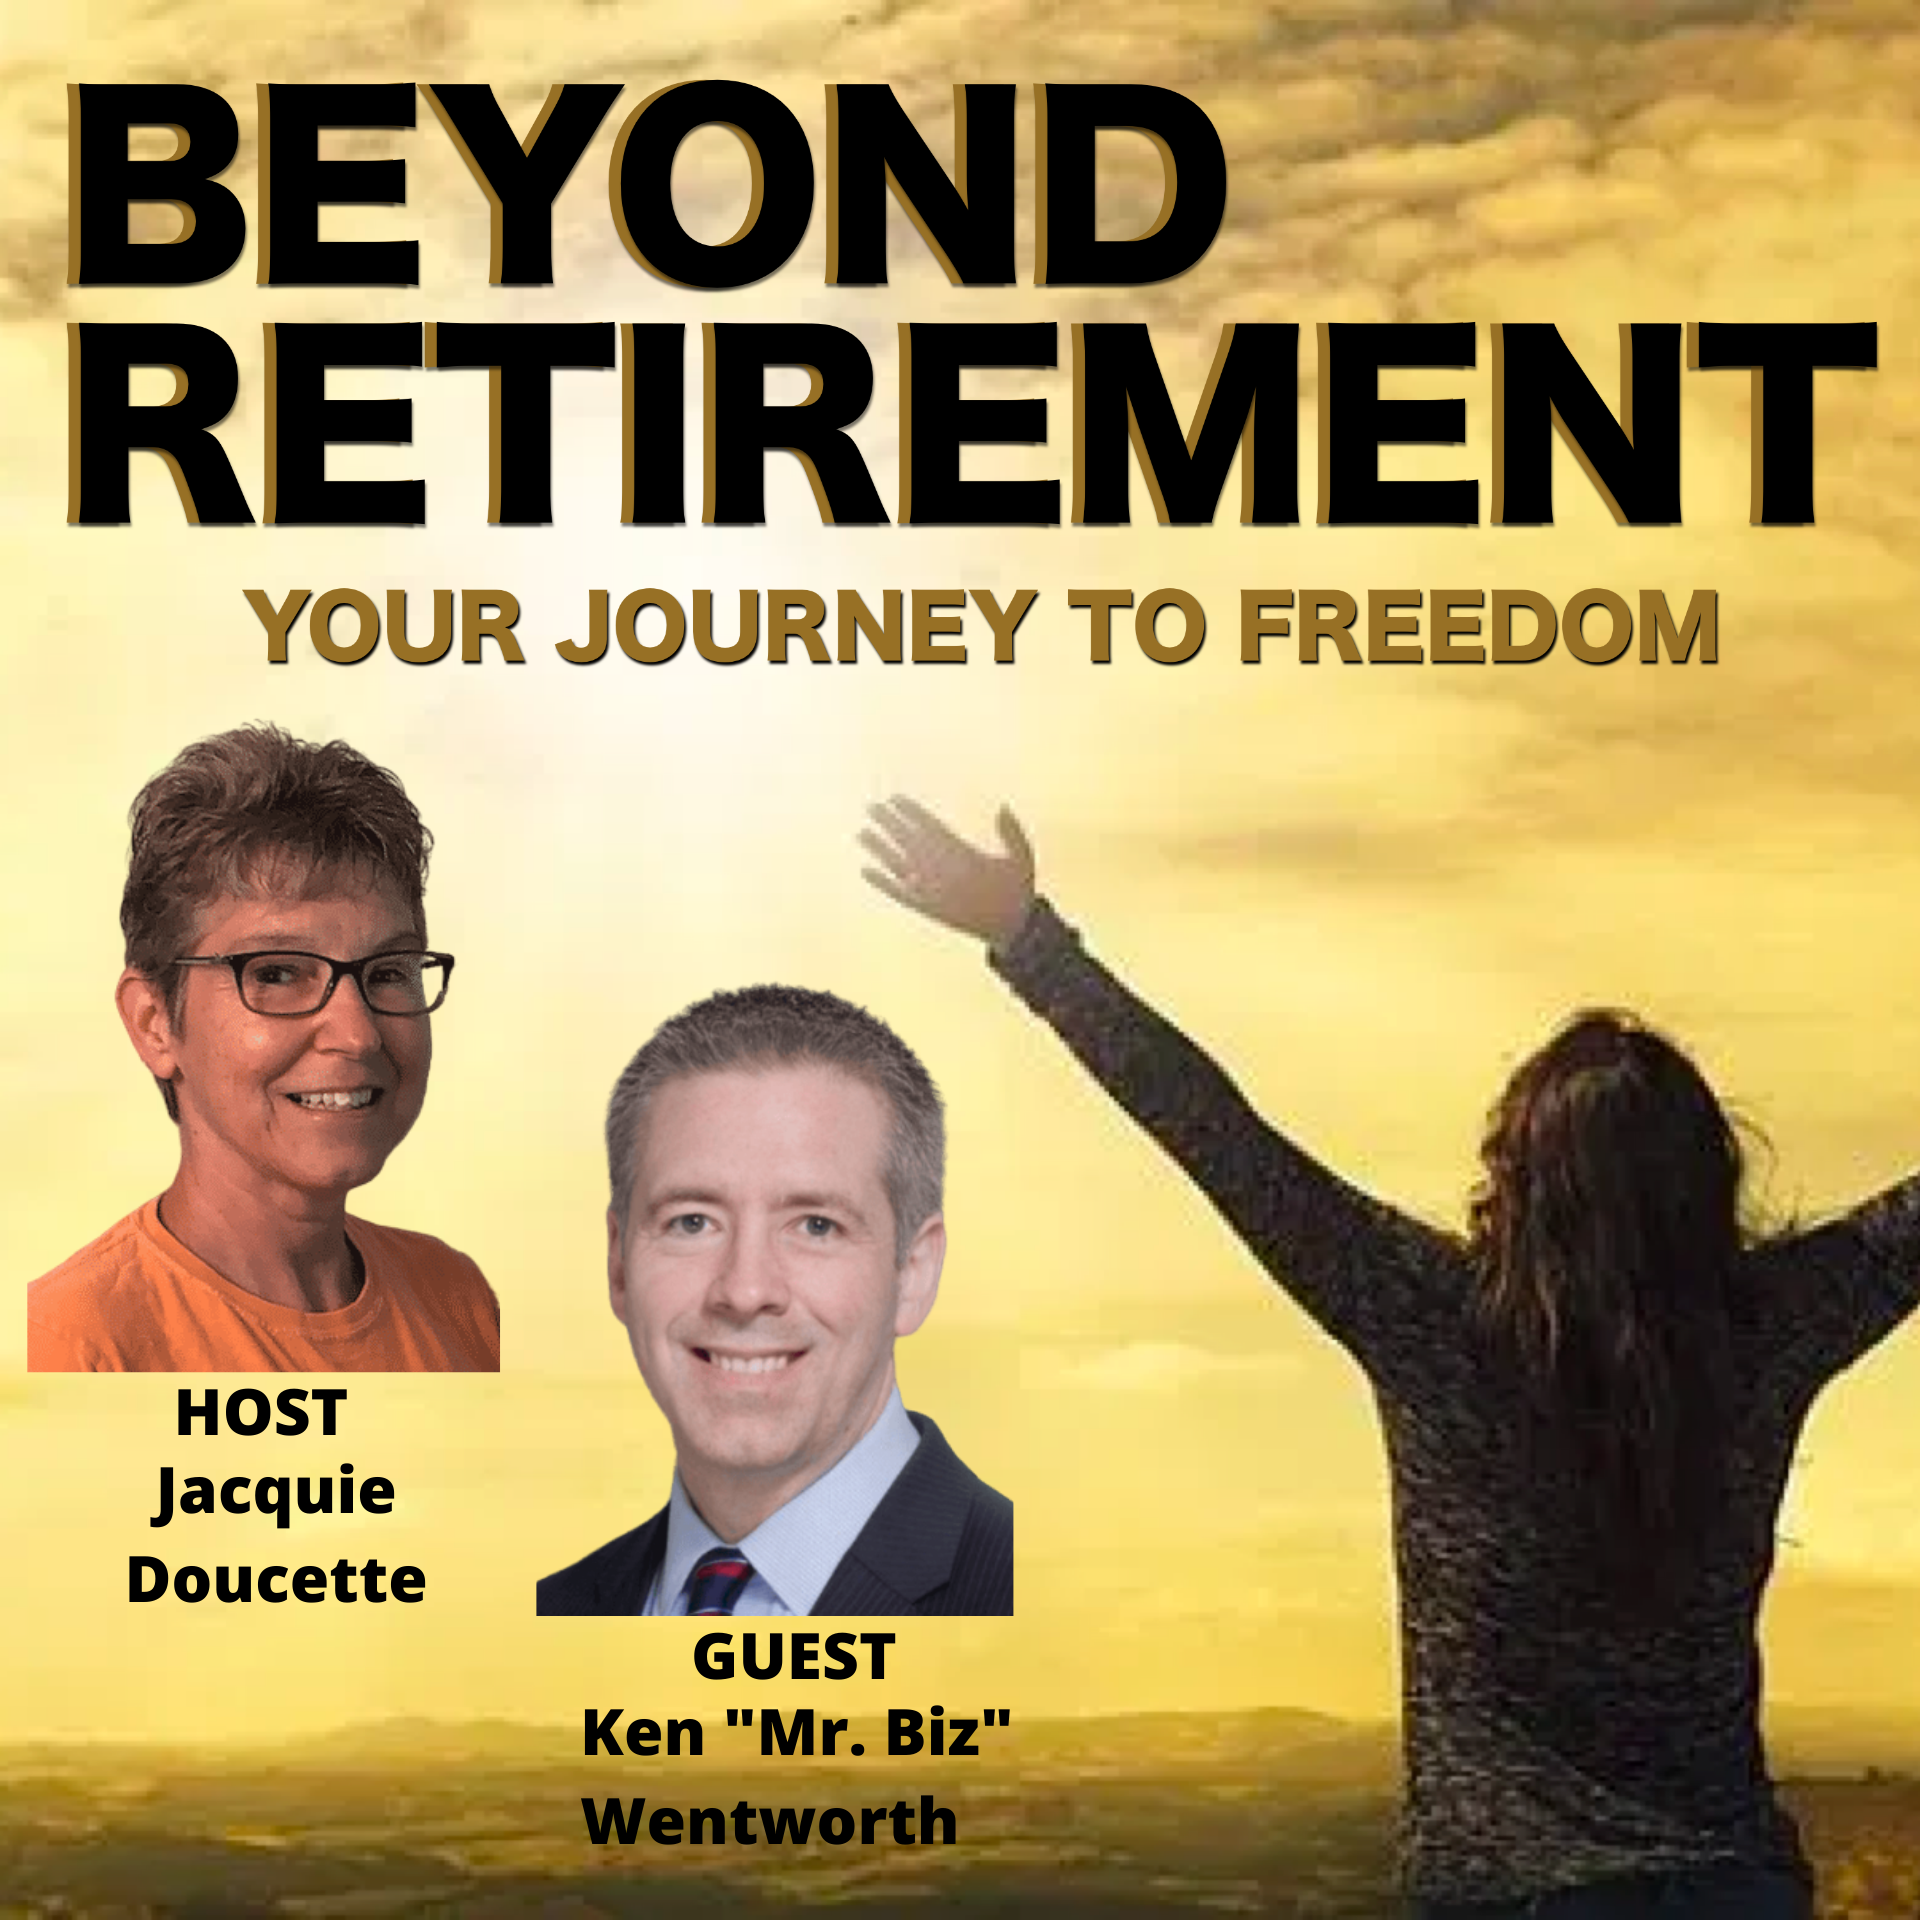 Beyond Retirement Podcast: The Best Ways to Reach Your Full Potential